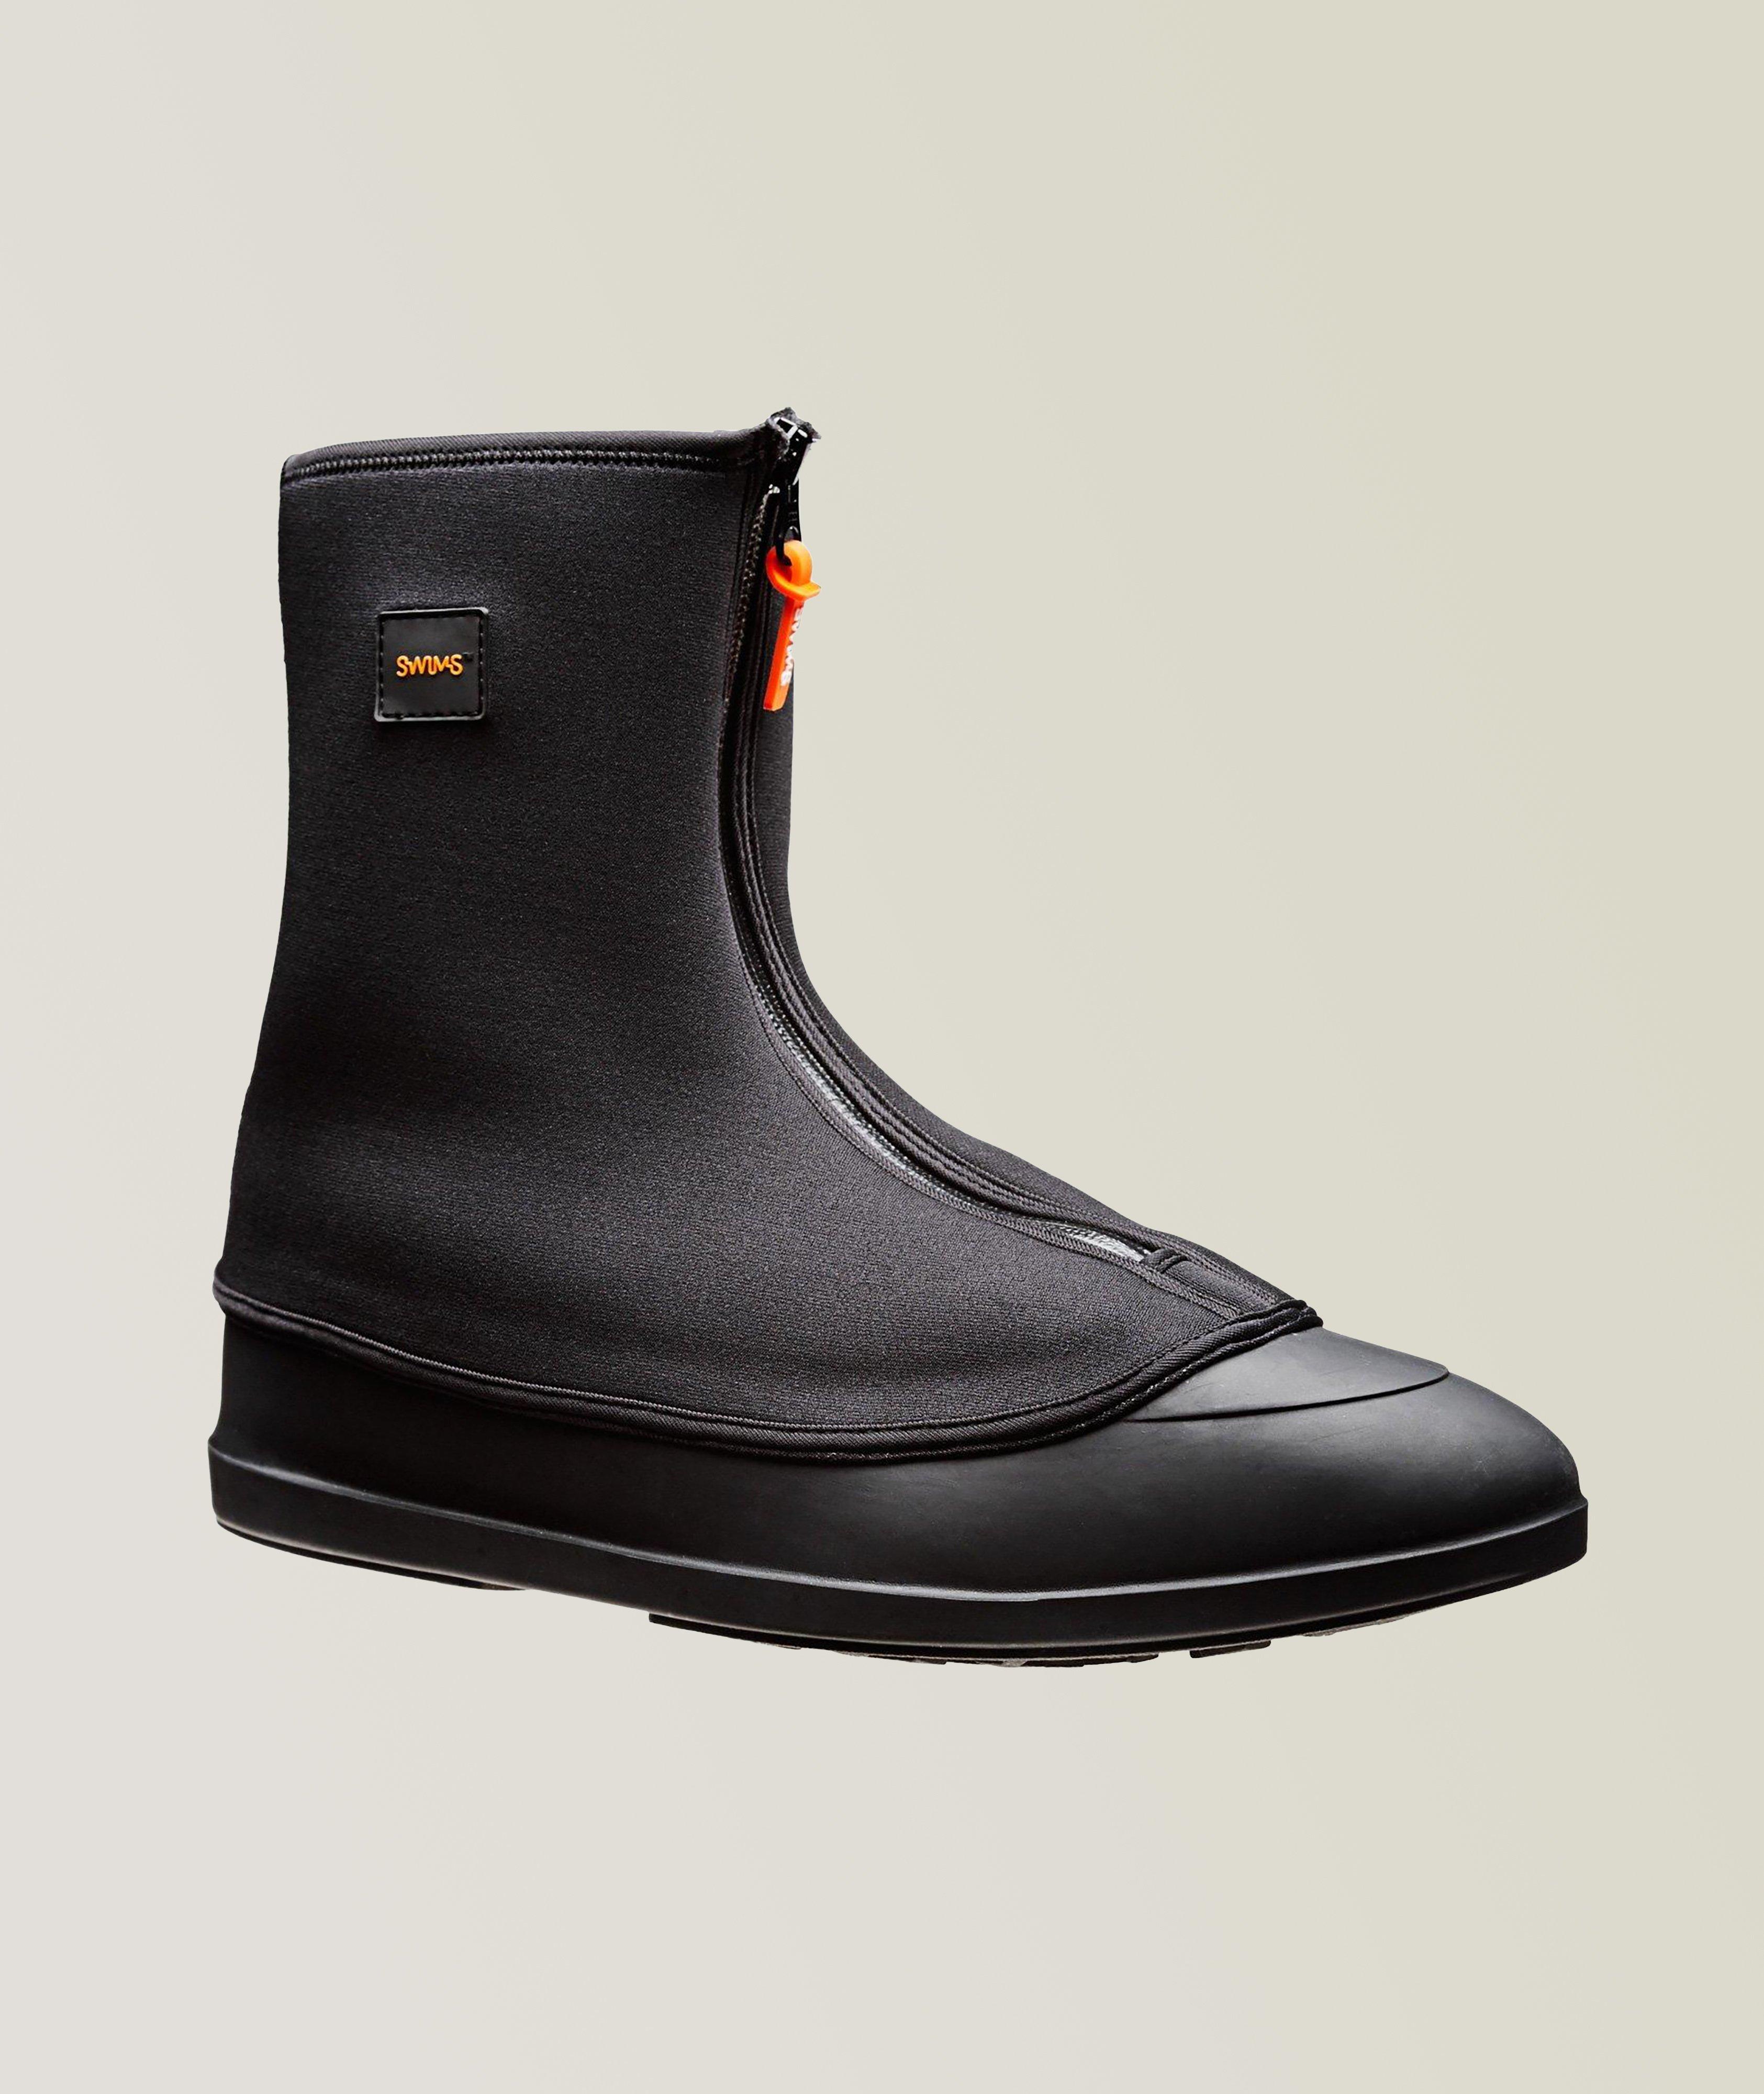 Swims Mobster Waterproof Overboots